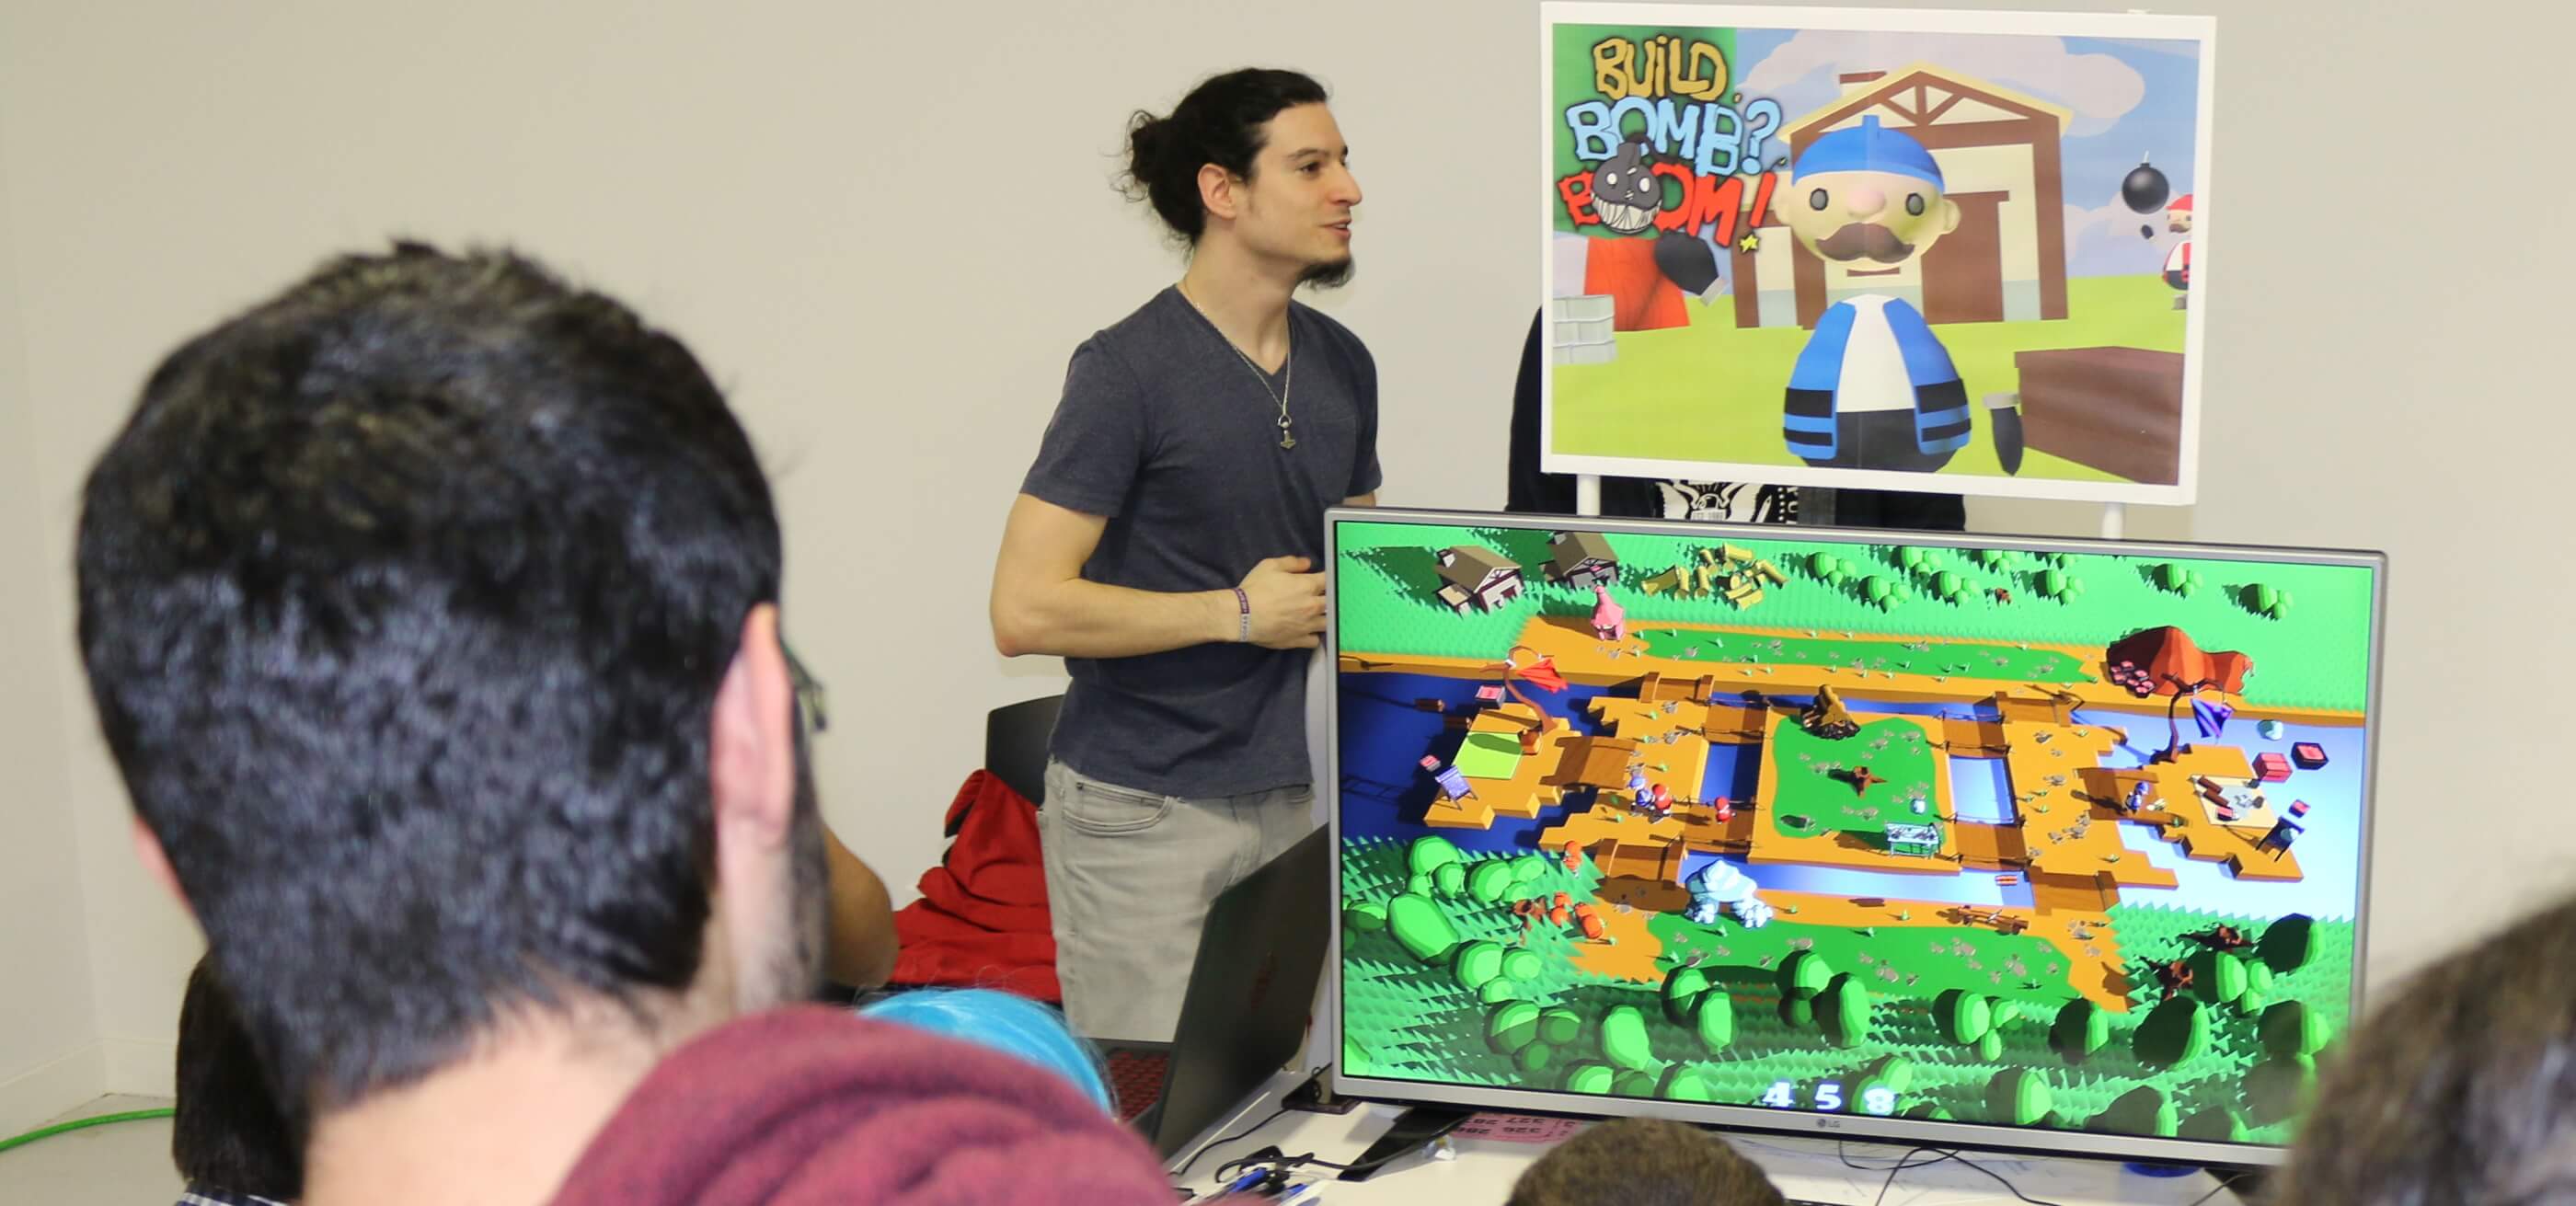 A DigiPen Bilbao student stands next to a television with a student game playing onscreen